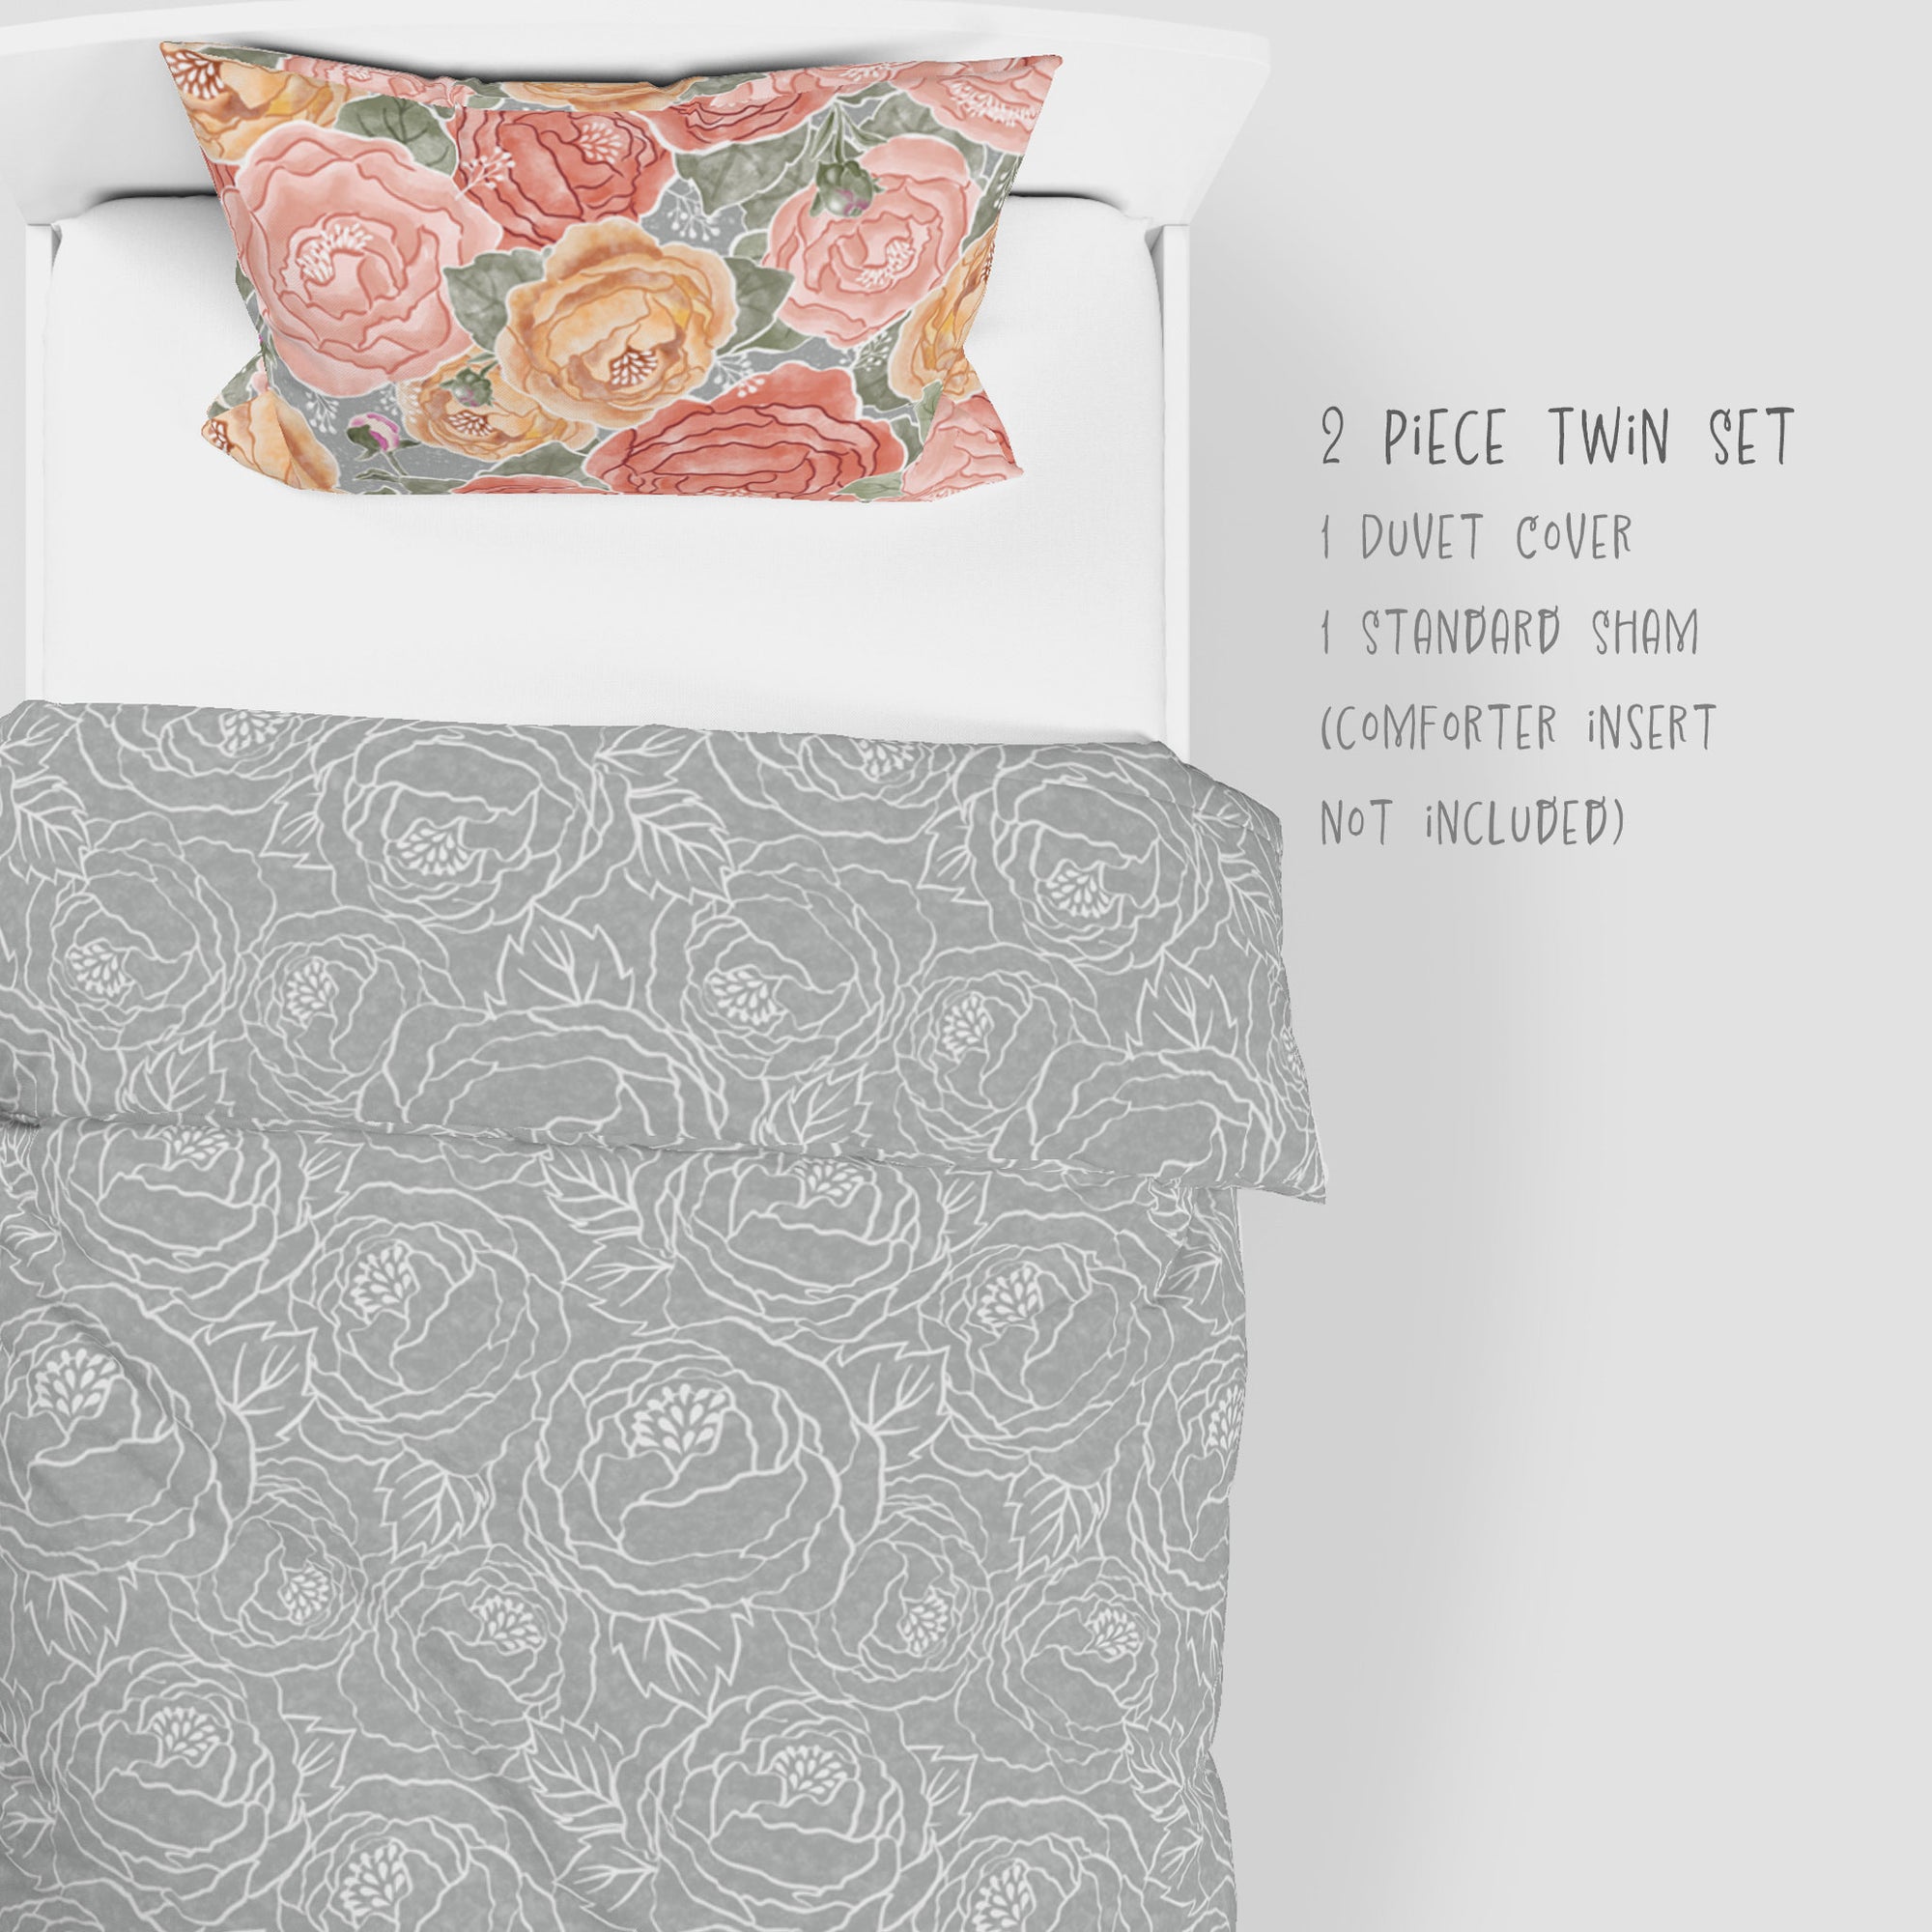  2 Piece Set for Twin sizes - Pretty In Peony Line on Gray comes with Duvet cover and one Sham